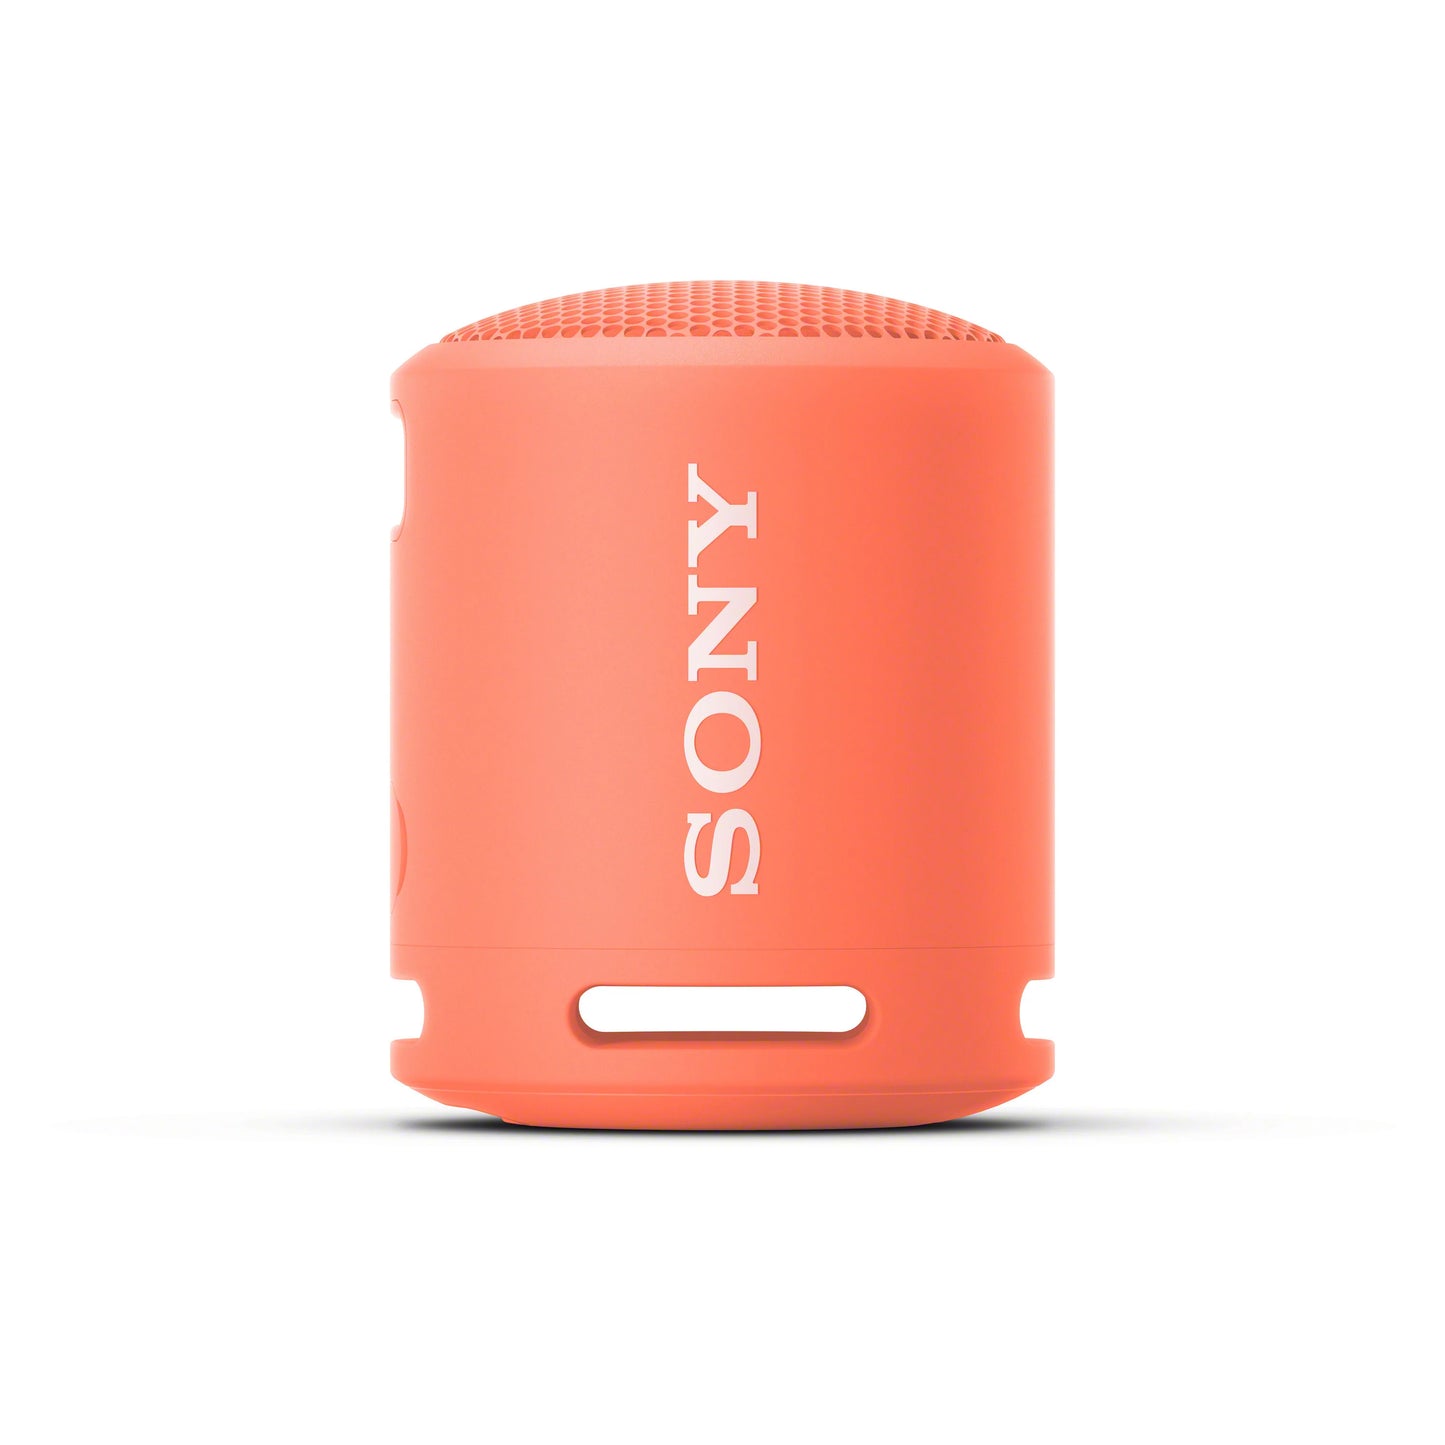 Sony EXTRA BASS SRS-XB13 Bluetooth Portable Speaker - Coral Pink